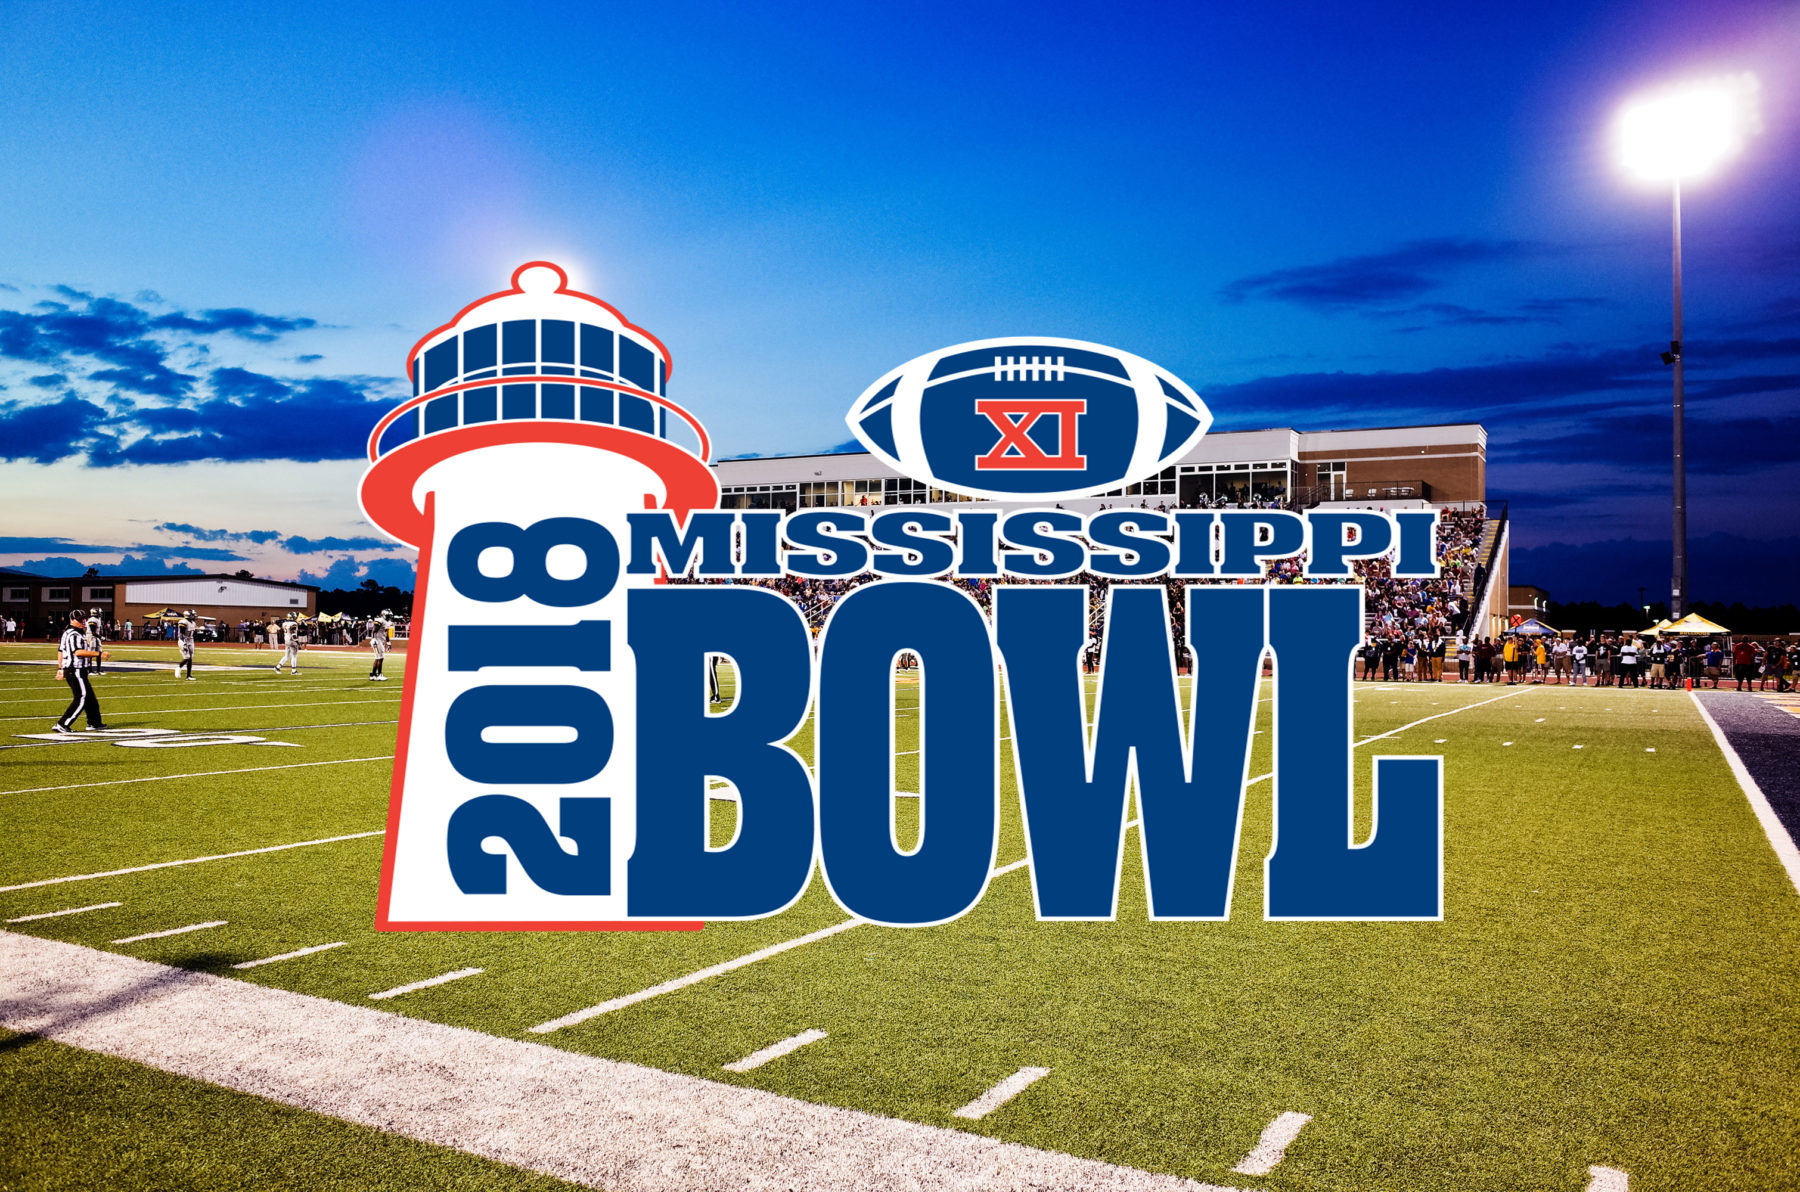 2018 mississippi bowl logo over a football field